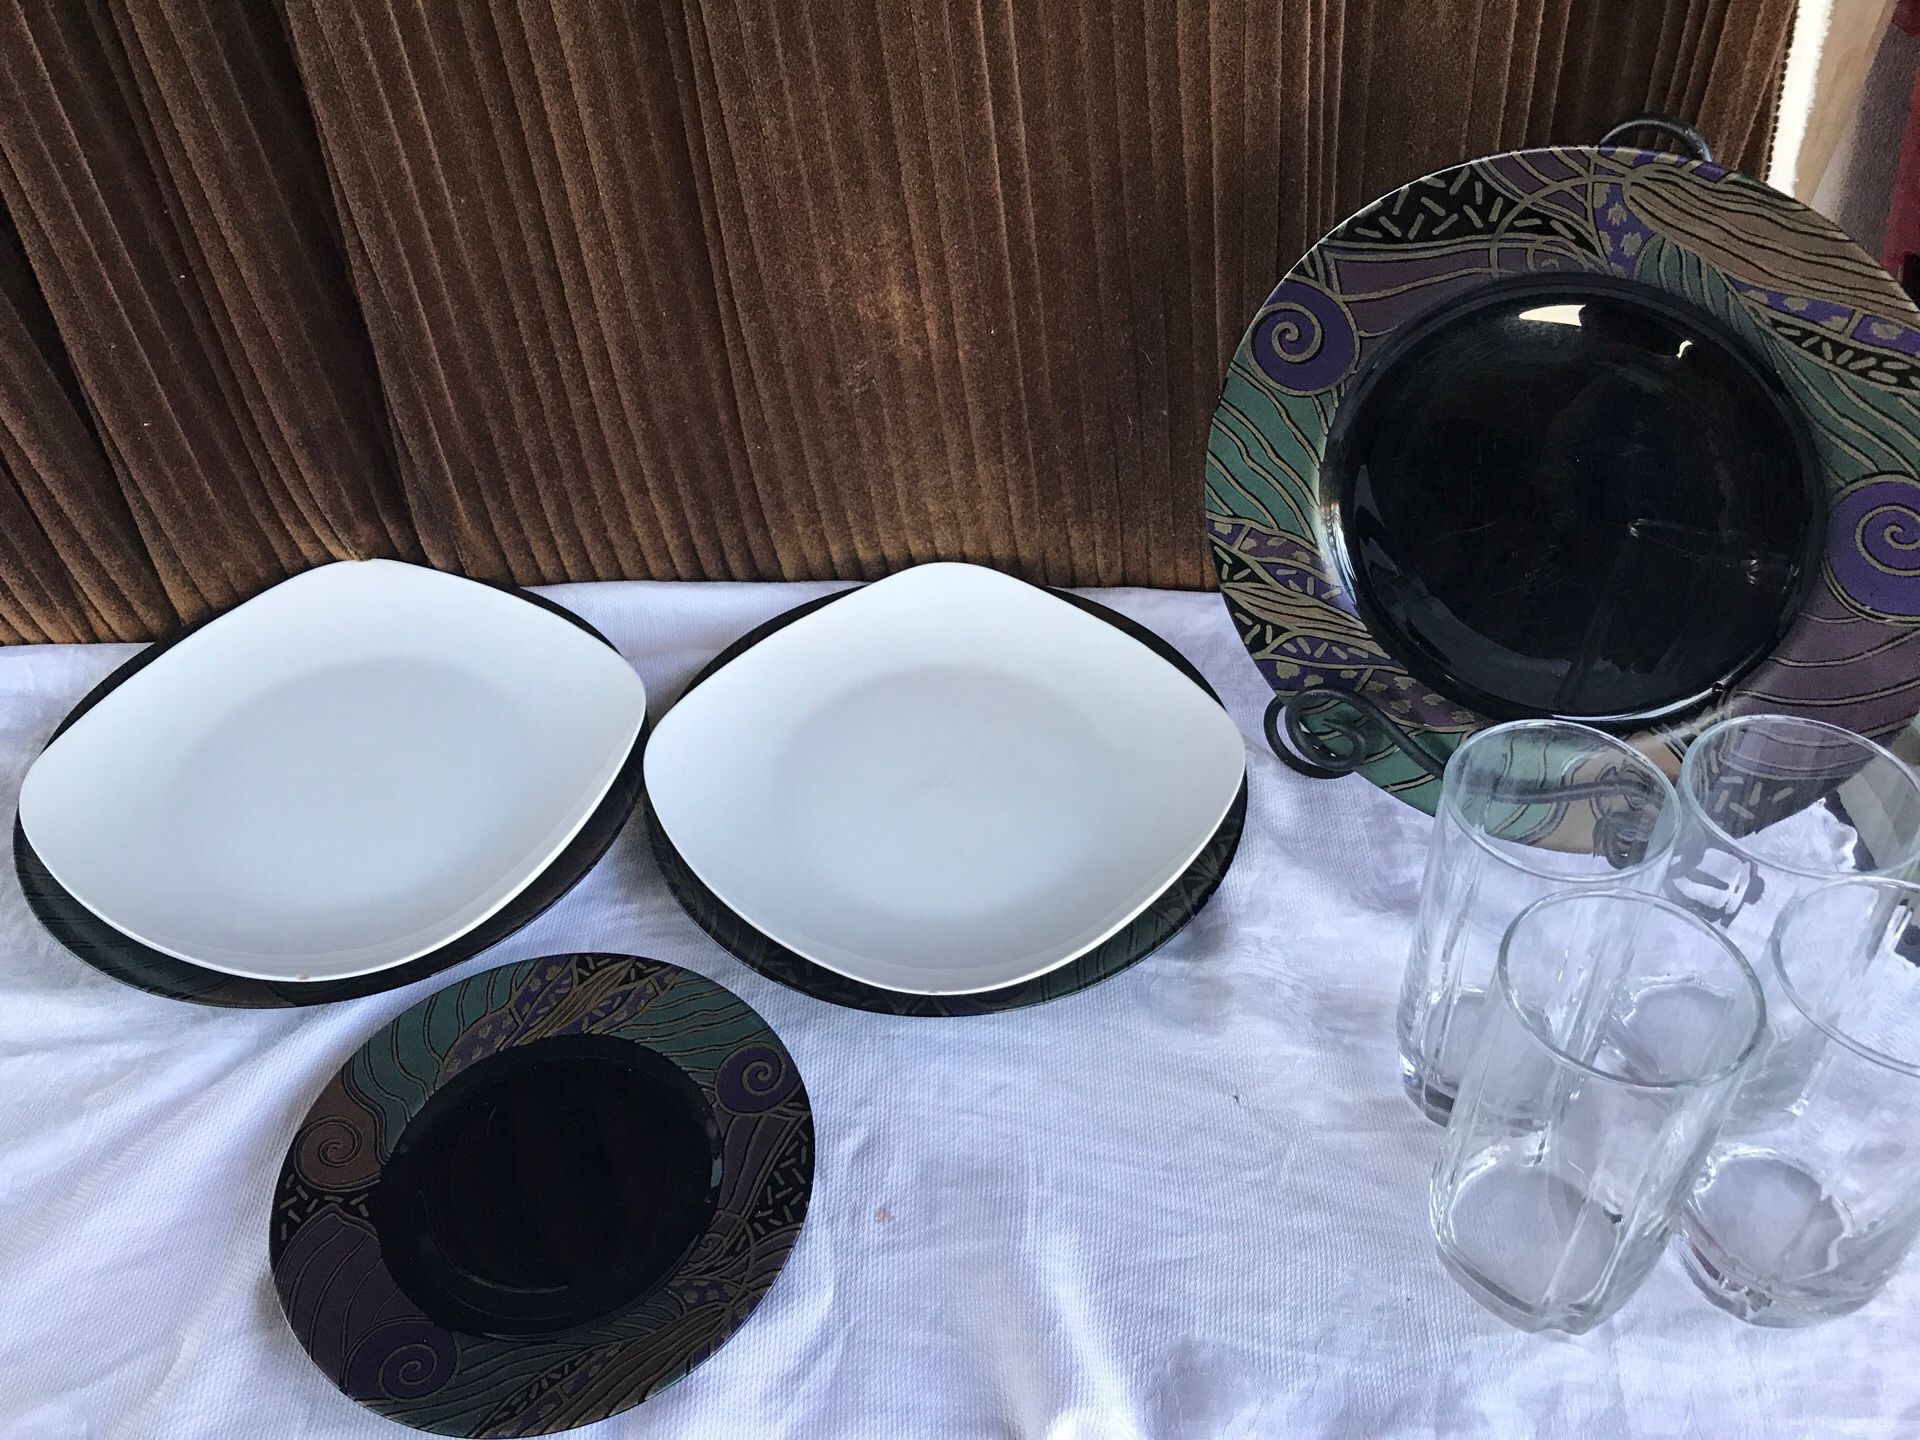 Set of plates and glasses (4)